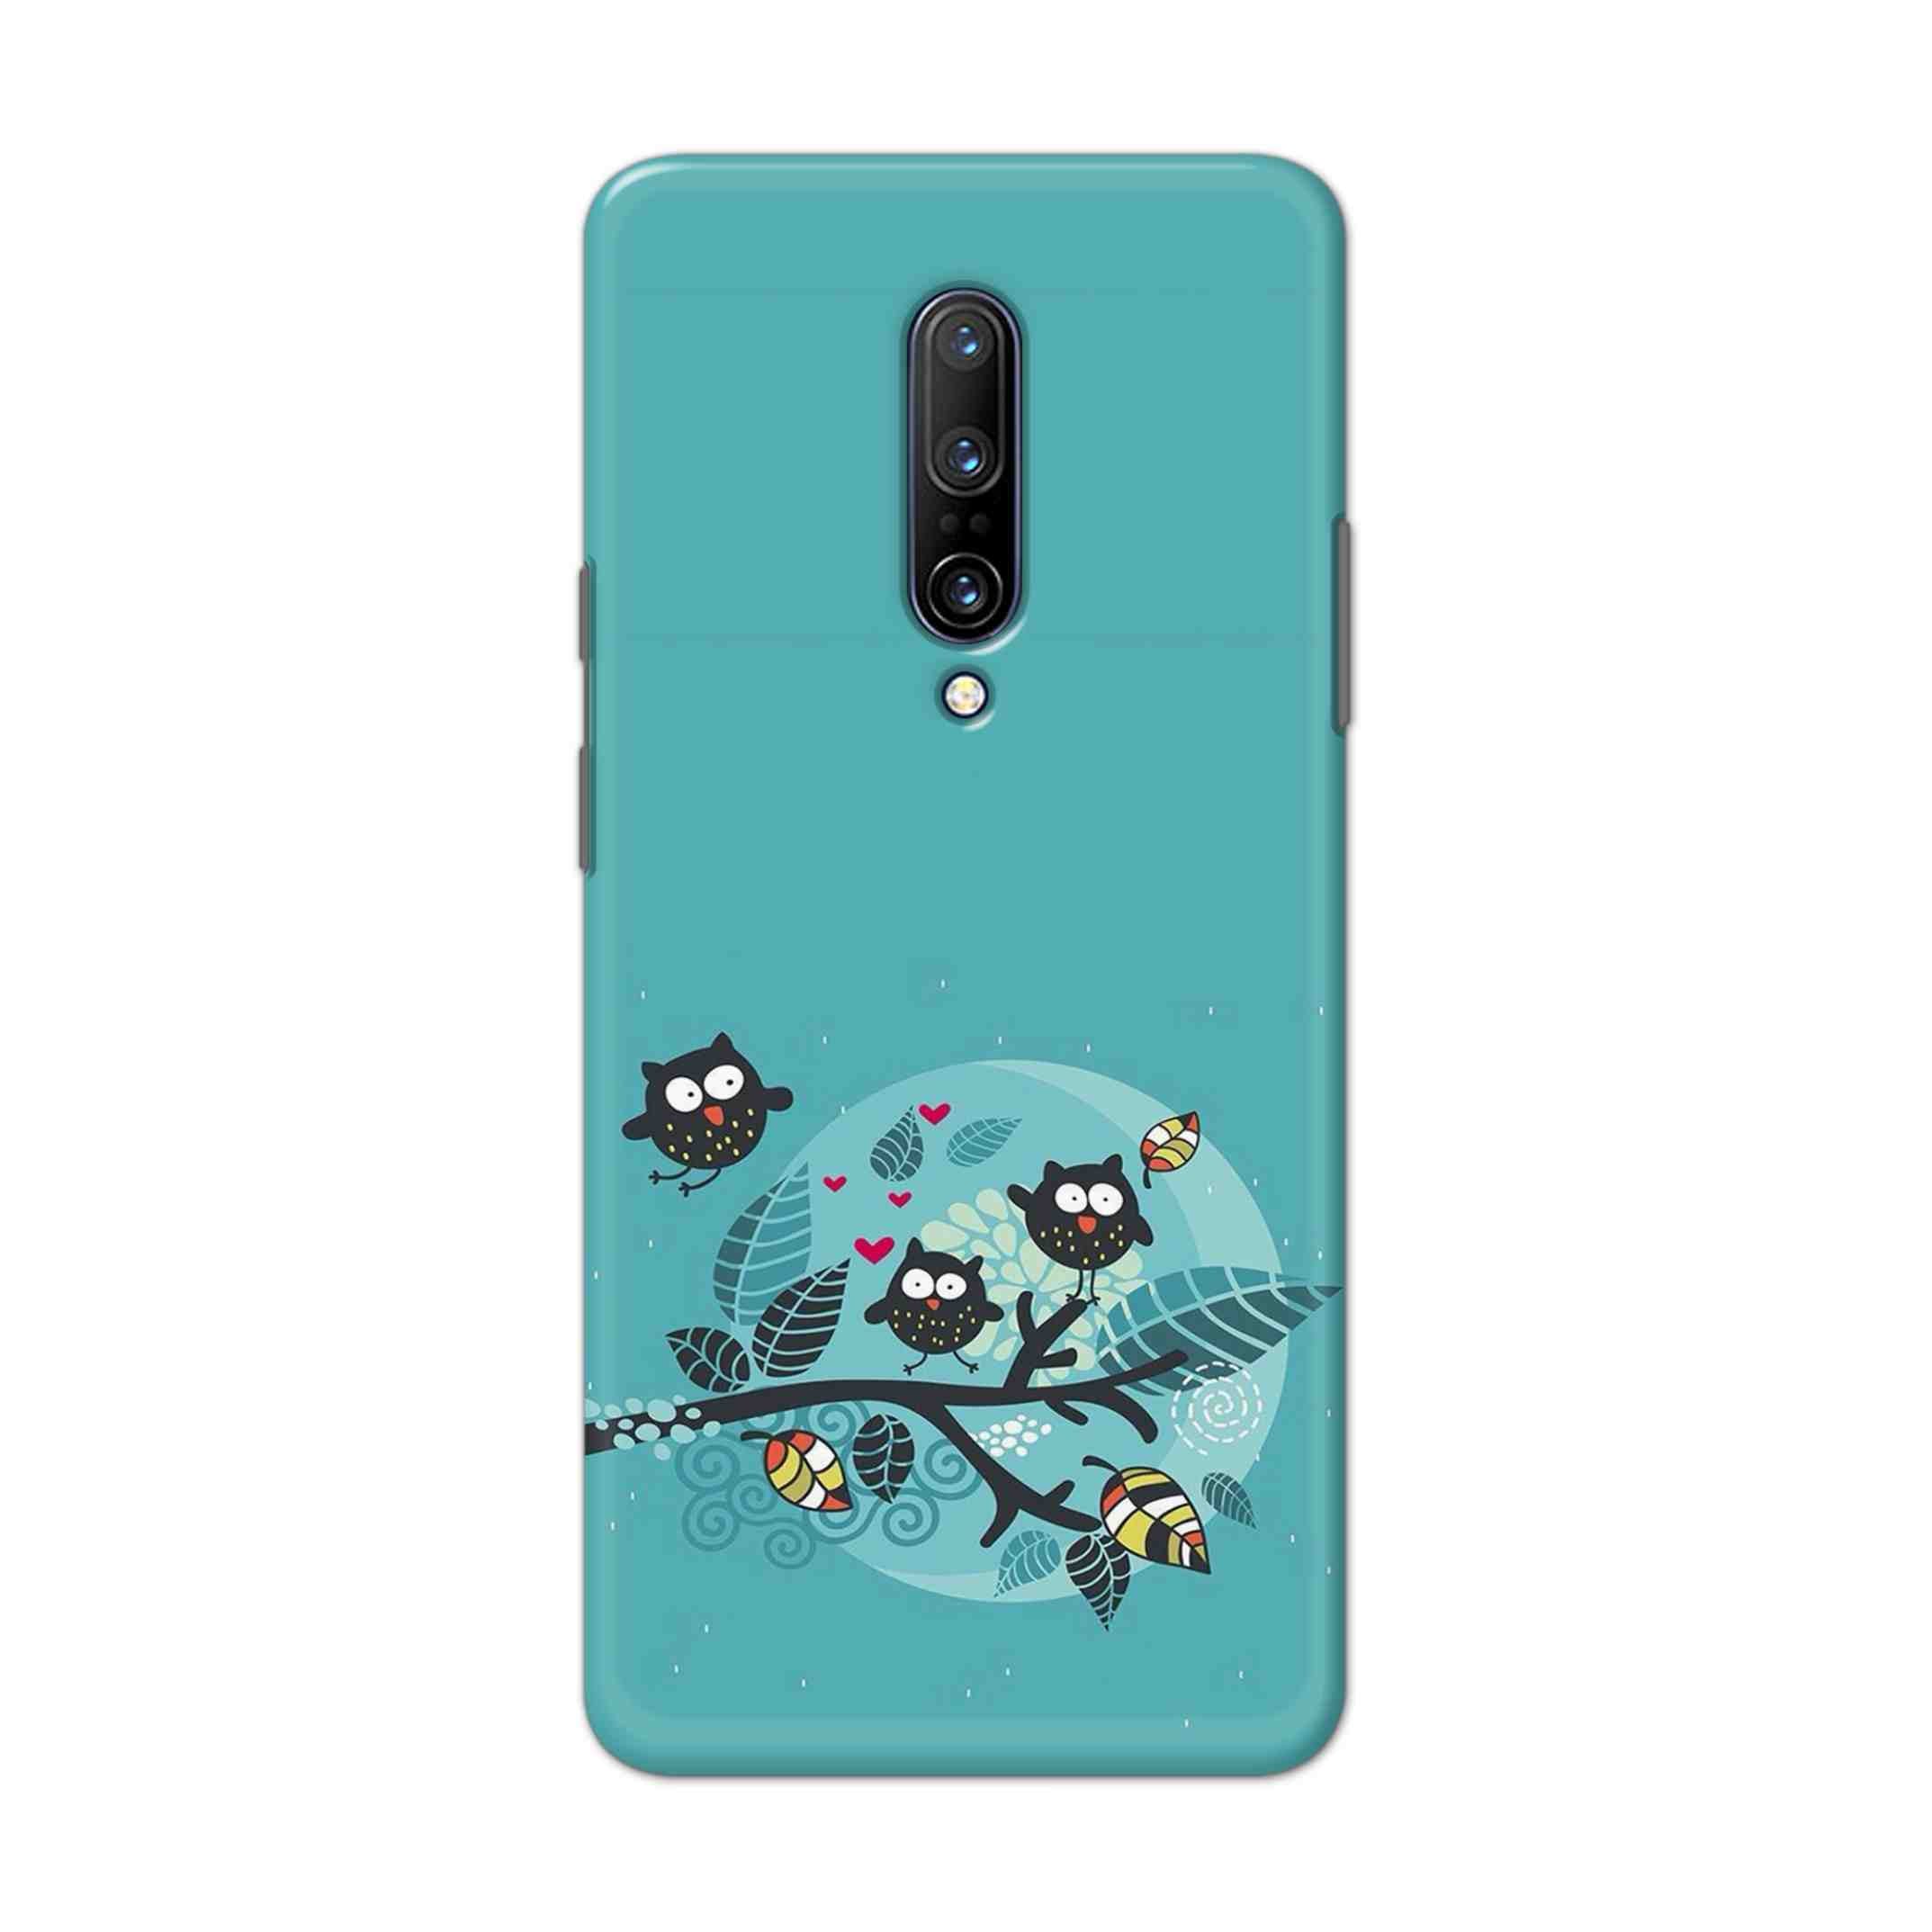 Buy Owl Hard Back Mobile Phone Case Cover For OnePlus 7 Pro Online